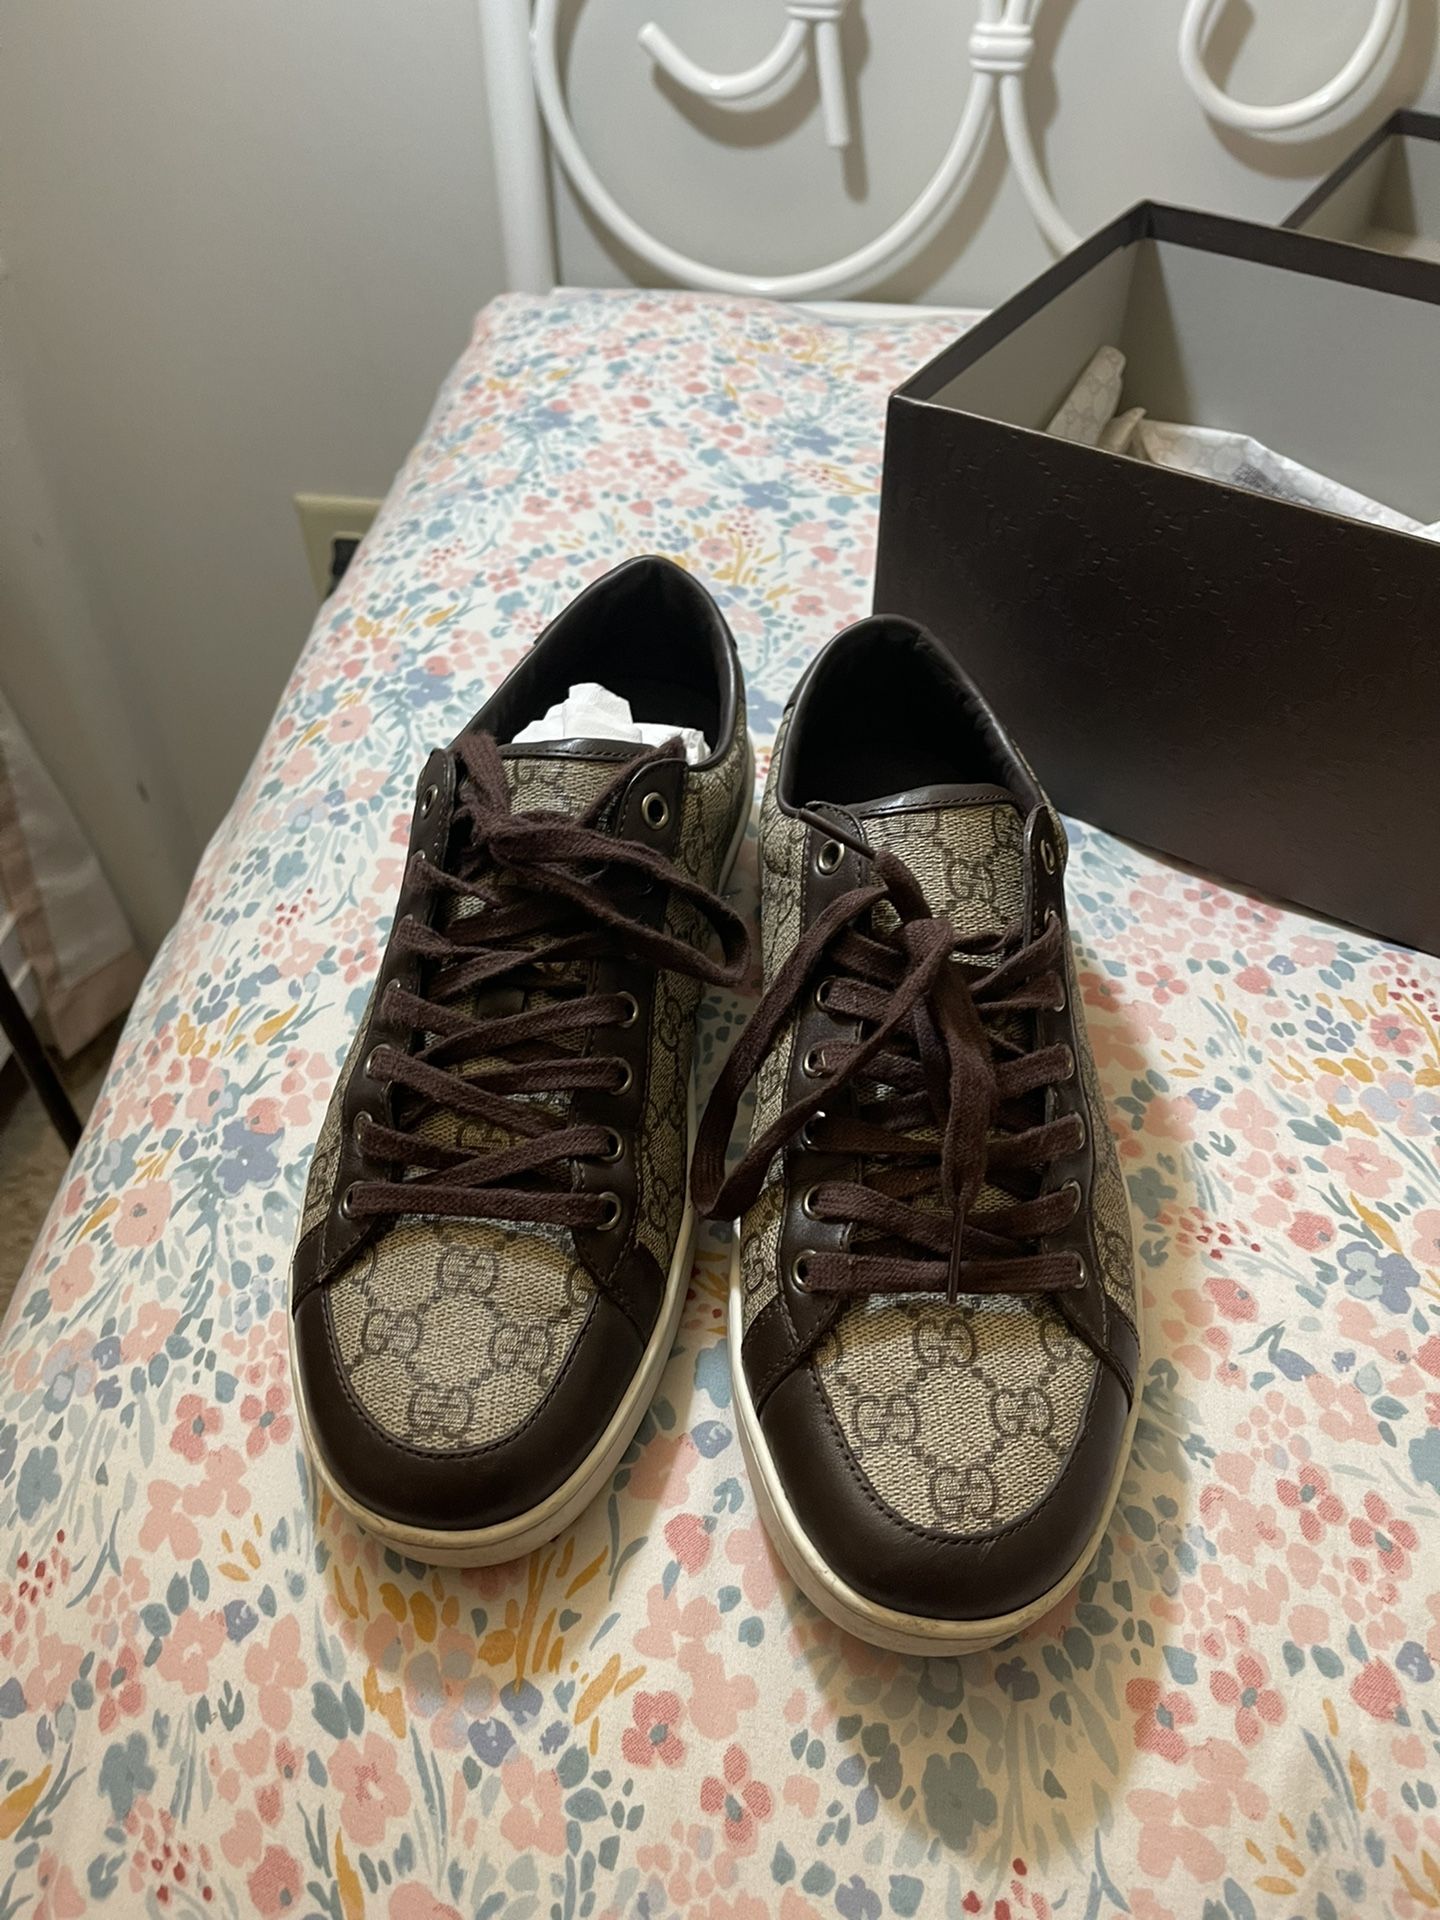 Gucci Sneakers 8G $300